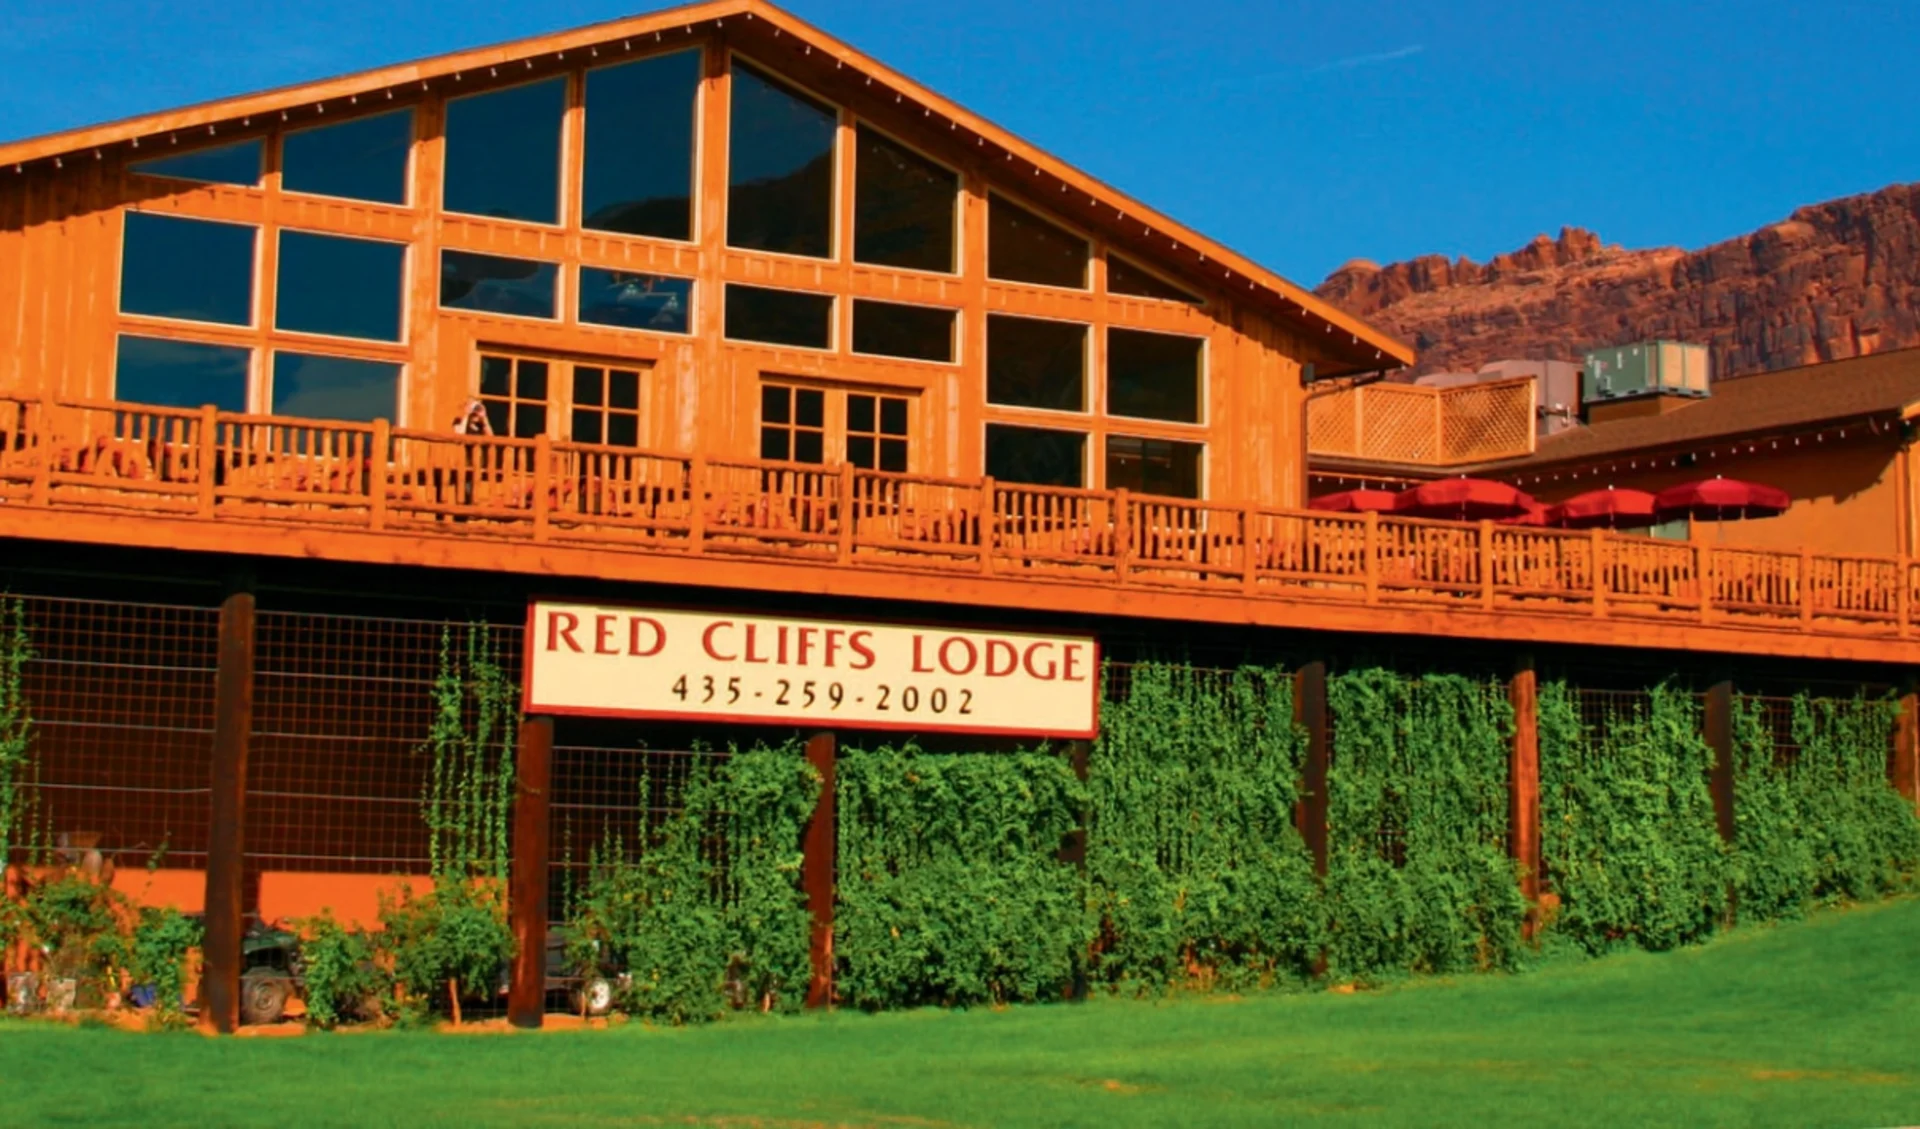 Red Cliffs Lodge in Moab: exterior red cliffs lodge holz himmel